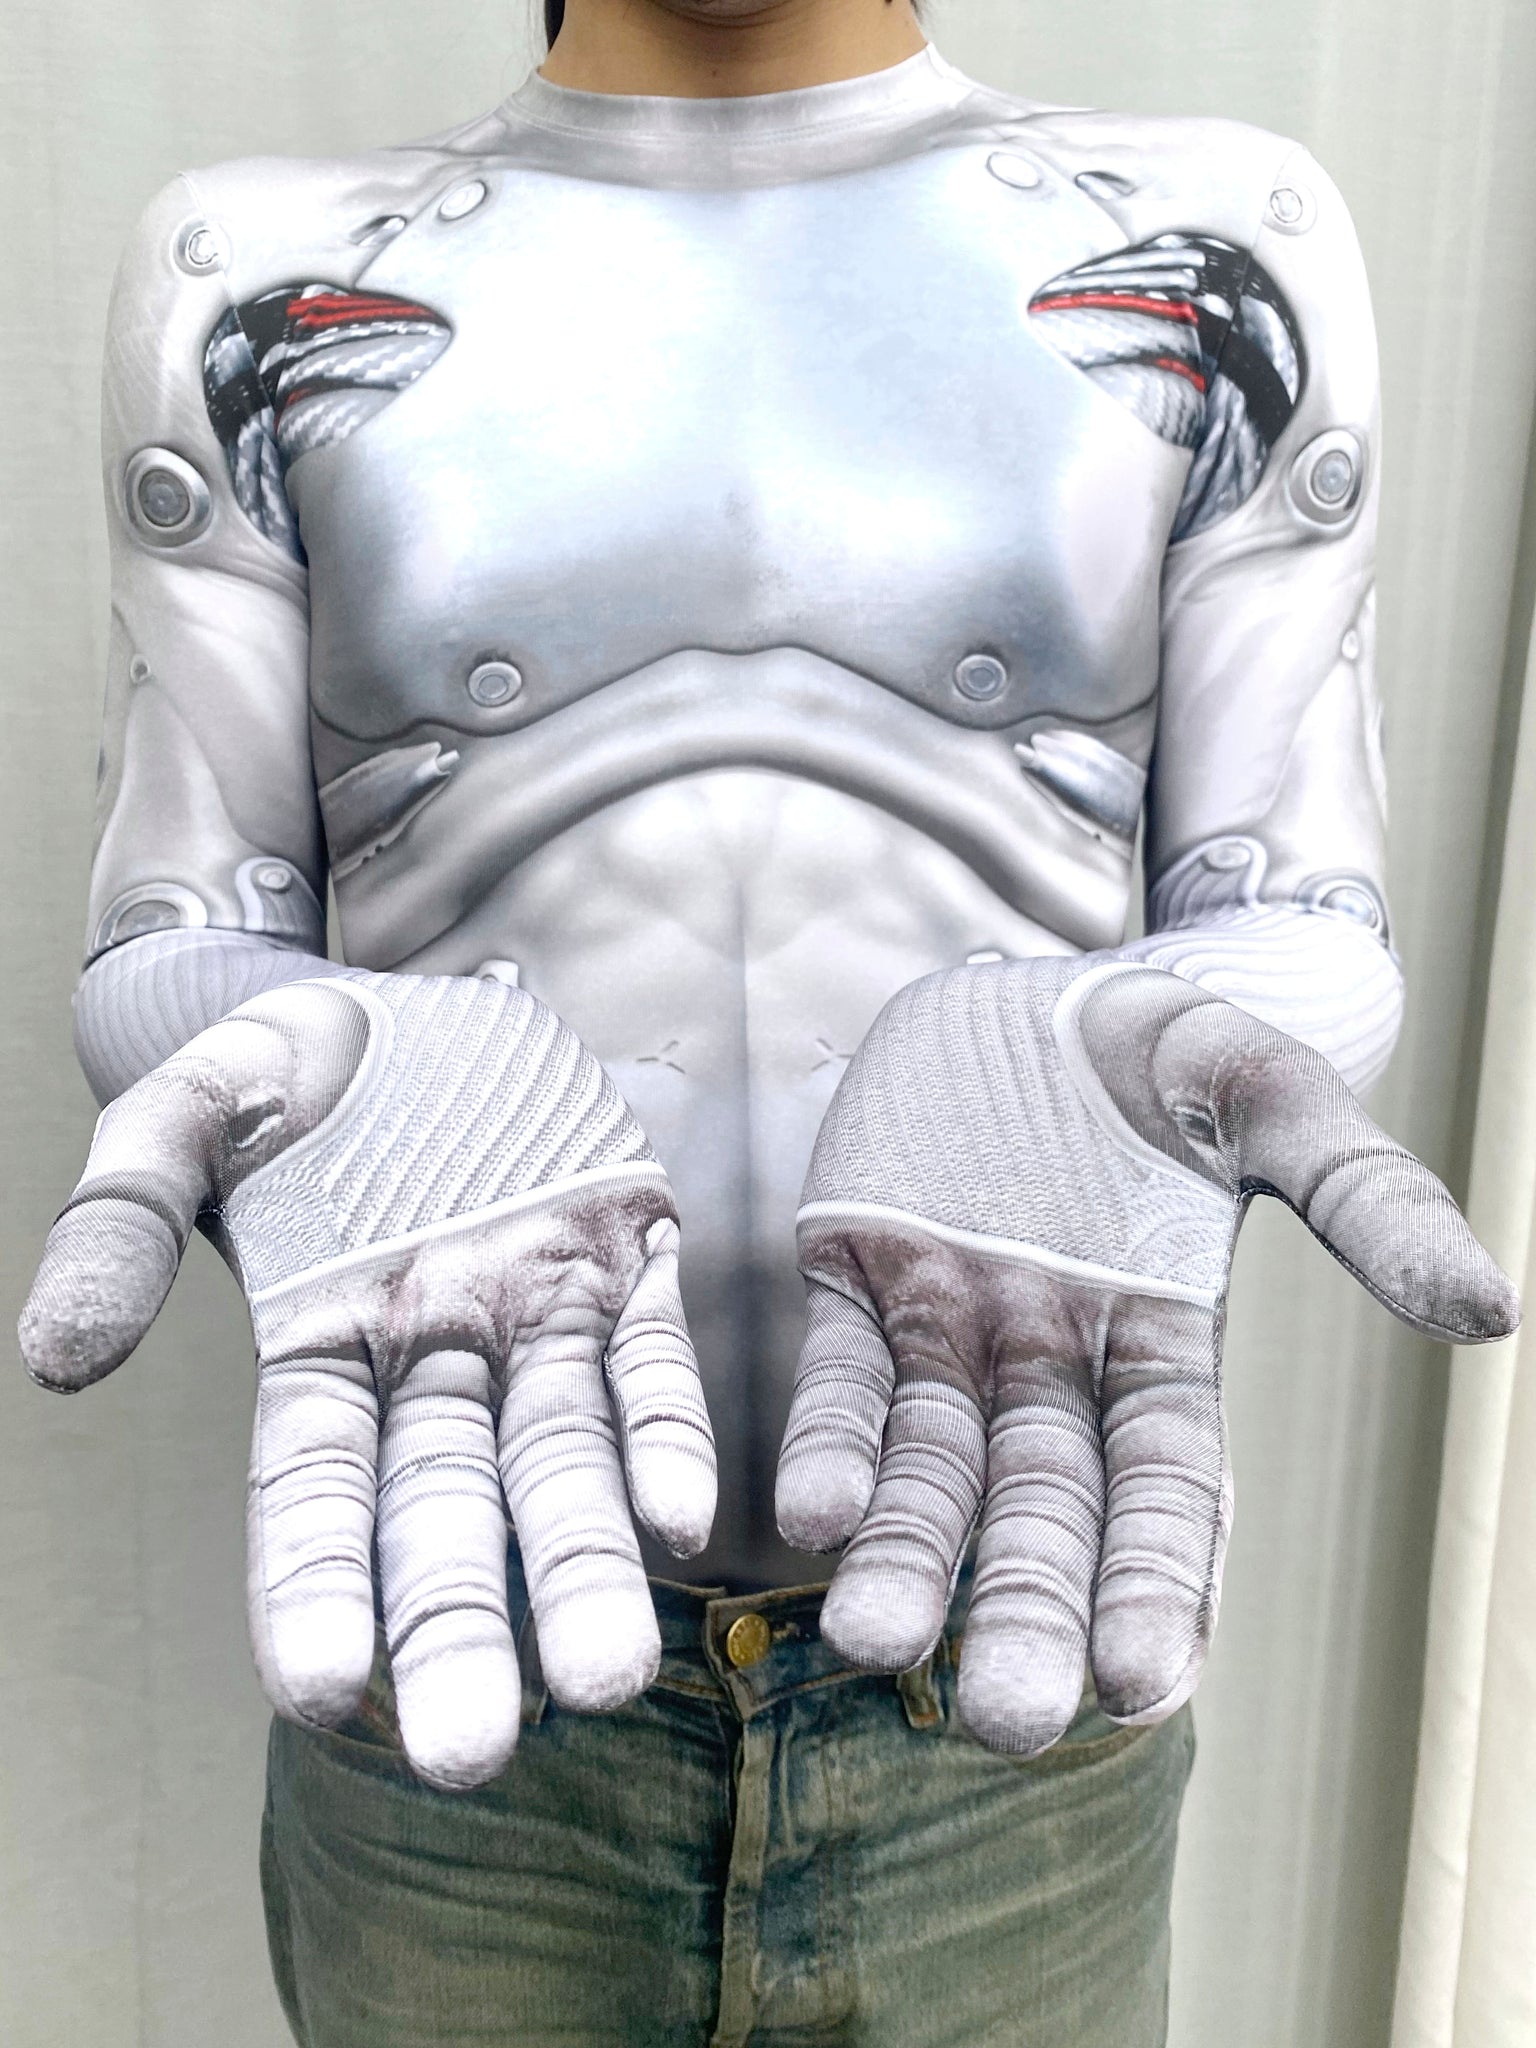 Mecanic Armored Top With Gloves